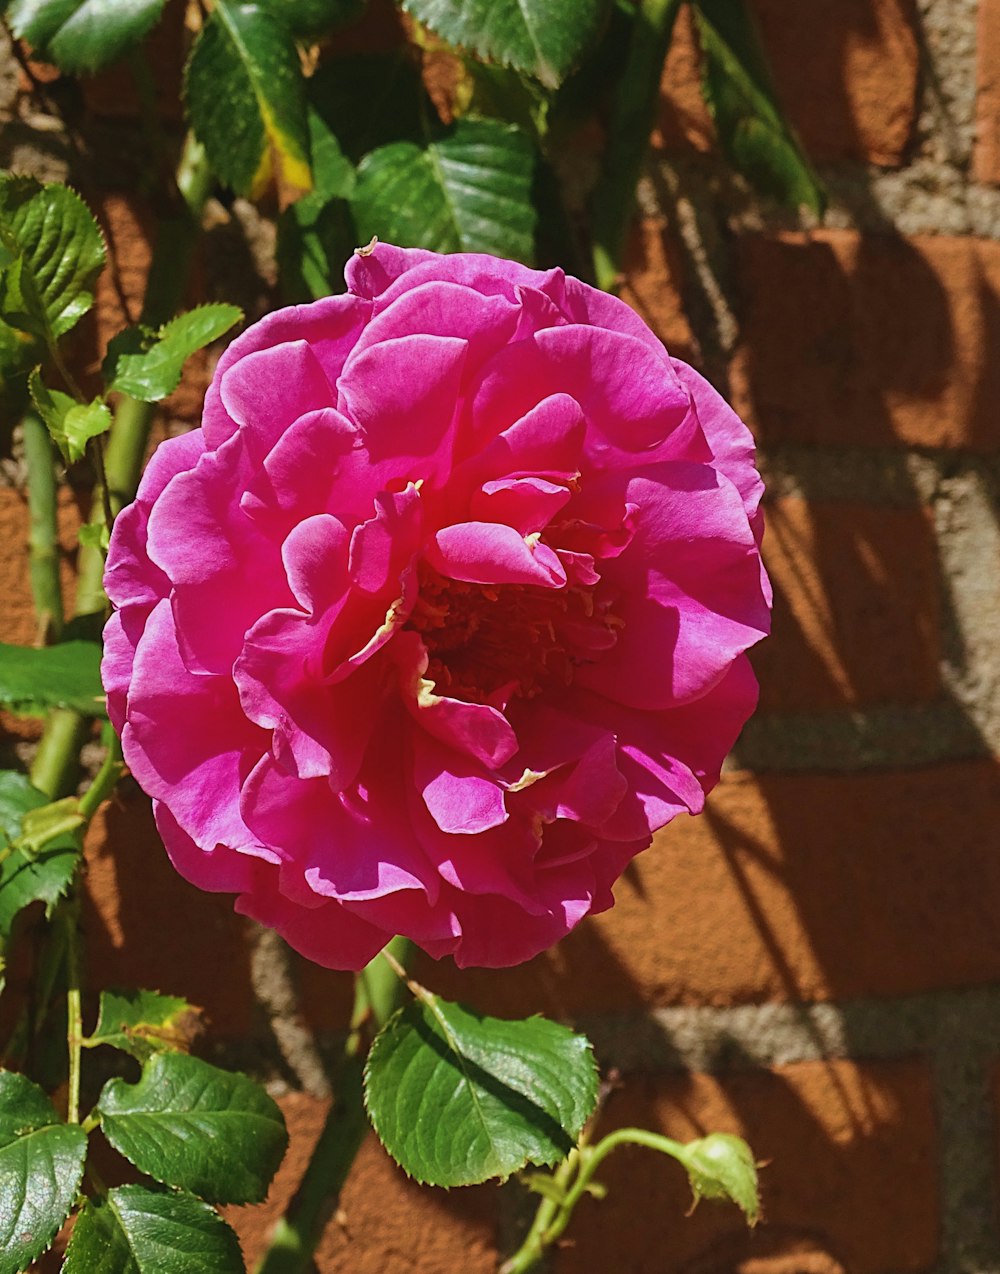 red rose in bloom during daytime photo – Free Plant Image on Unsplash